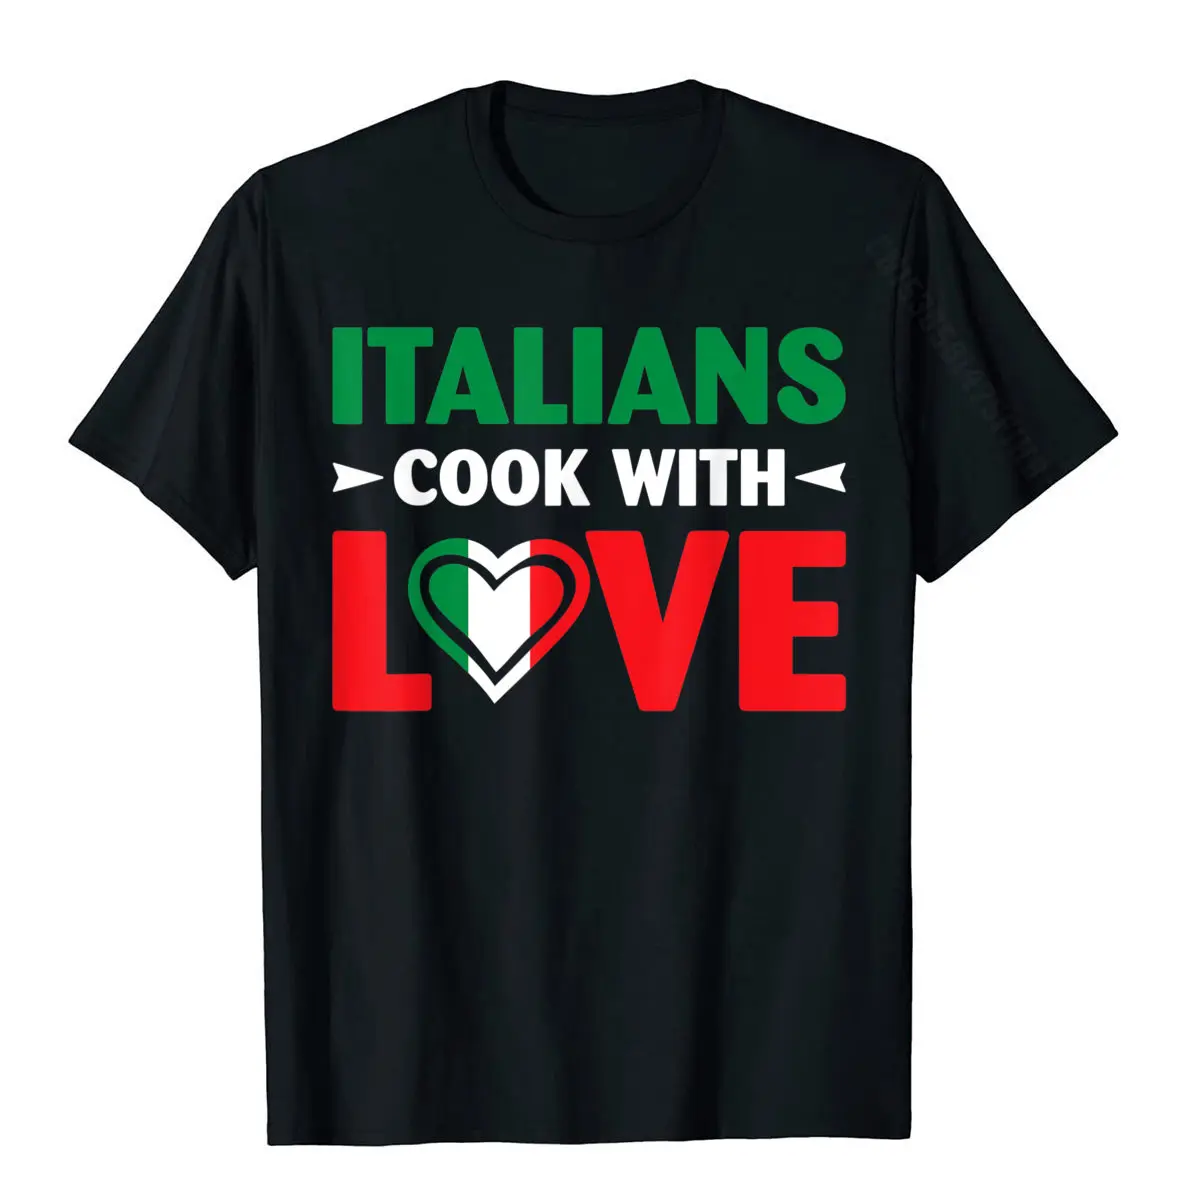 Cook With Love Italian Chef Funny Sayings Quotes T-Shirt Funny T Shirt For Adult Cotton Top T-Shirts Design Funny